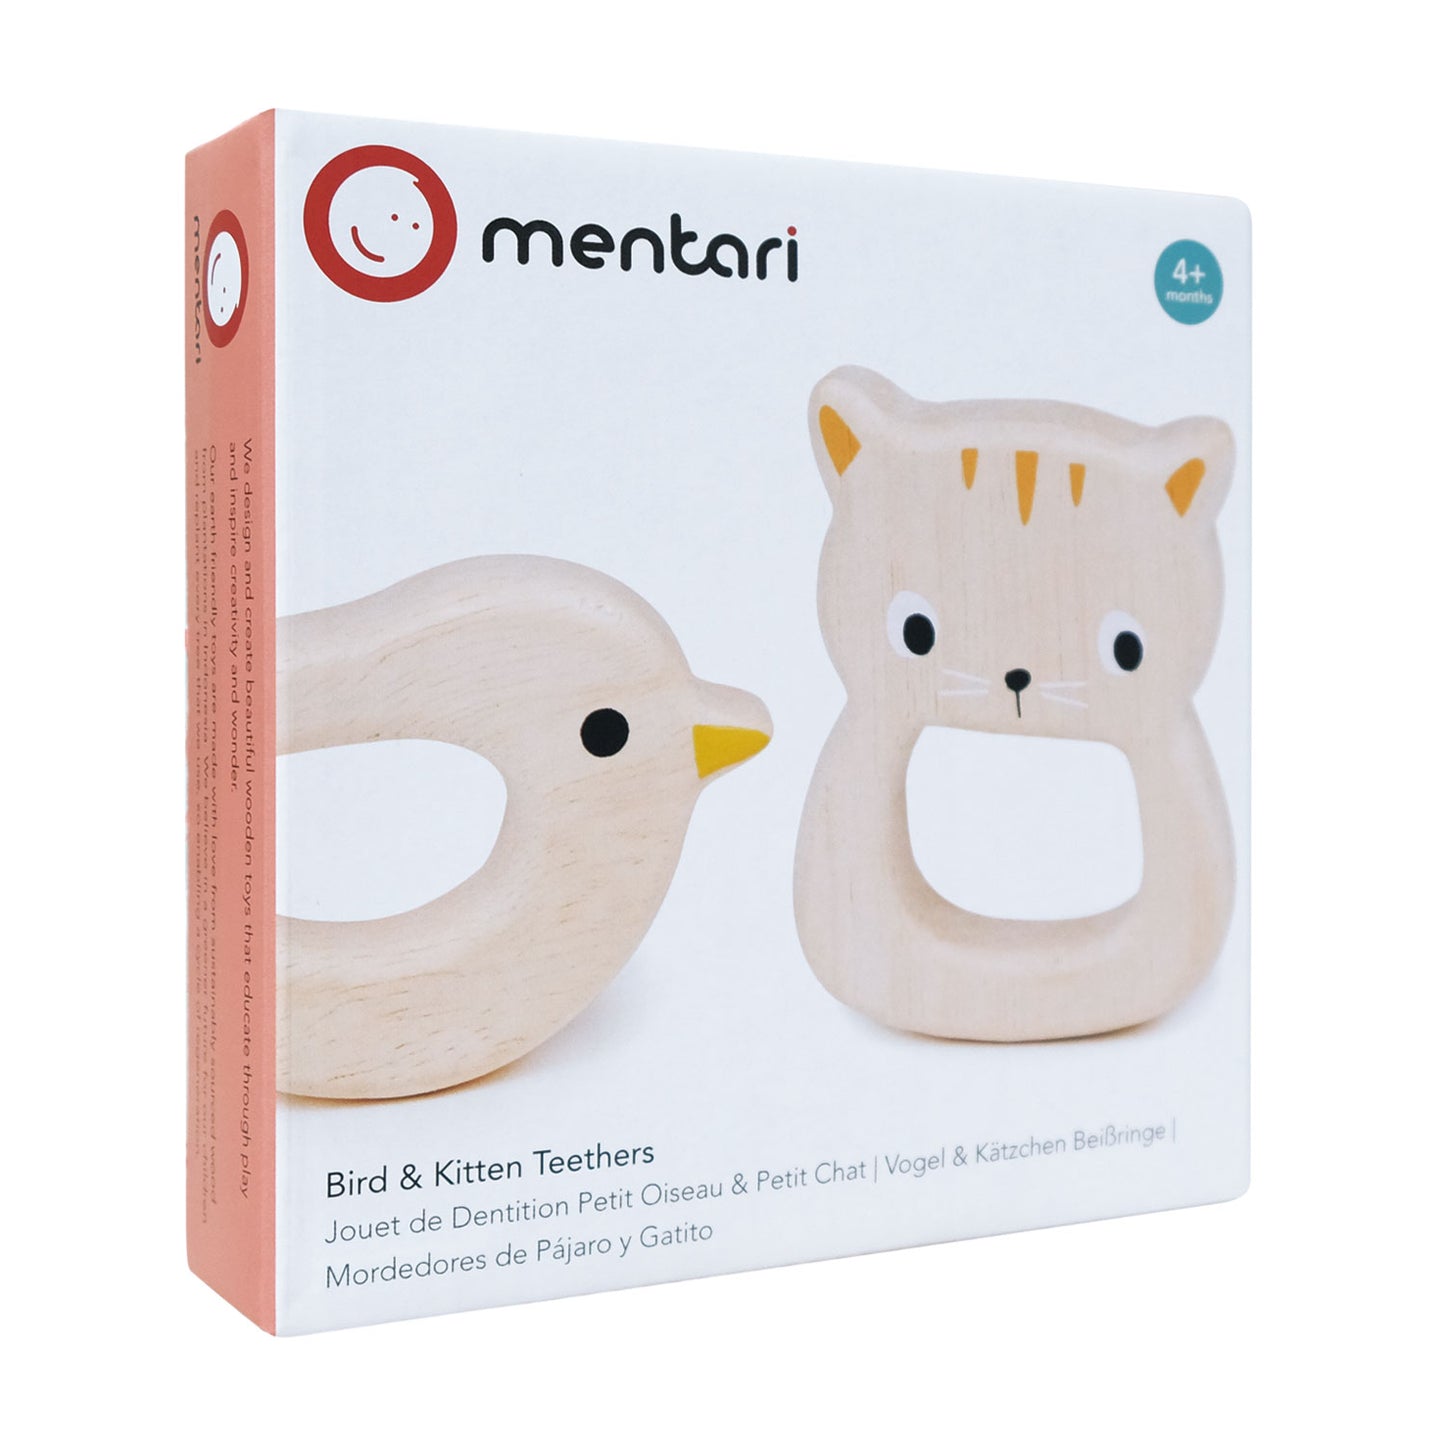 Box containing wooden teethers in the shape of a bird and a kitten 